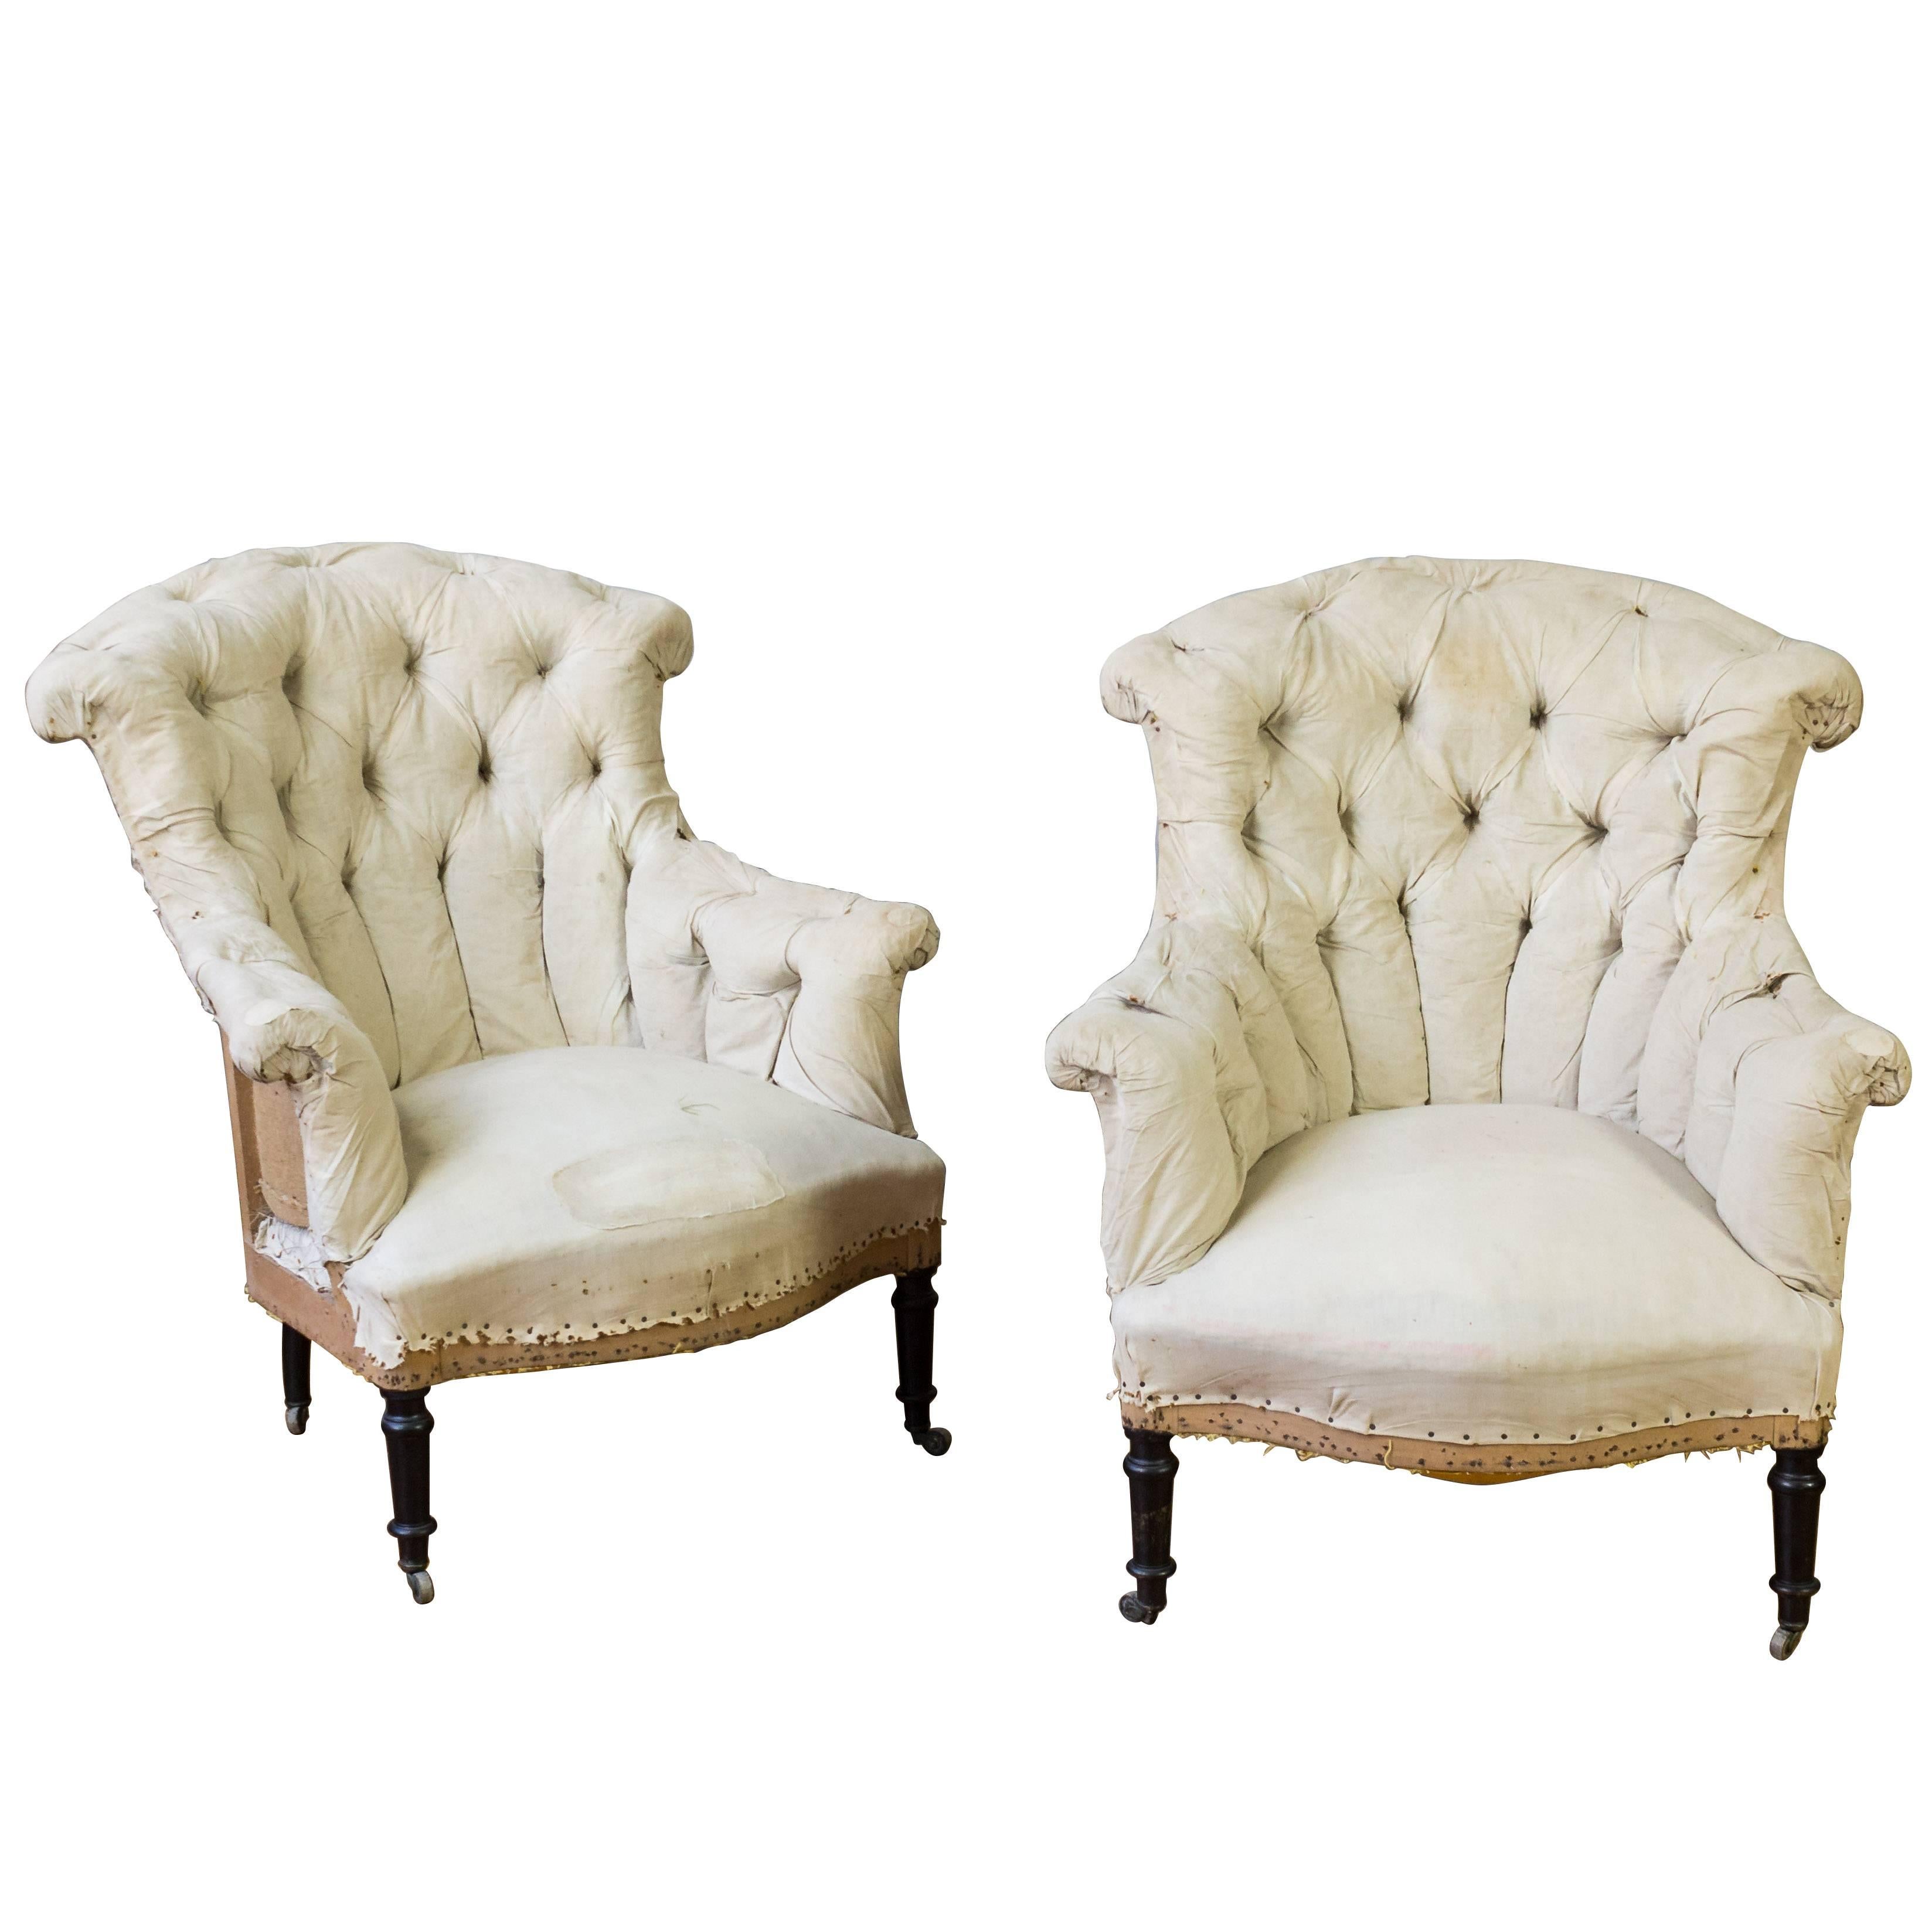 Pair of Tufted and Scroll Back Armchairs